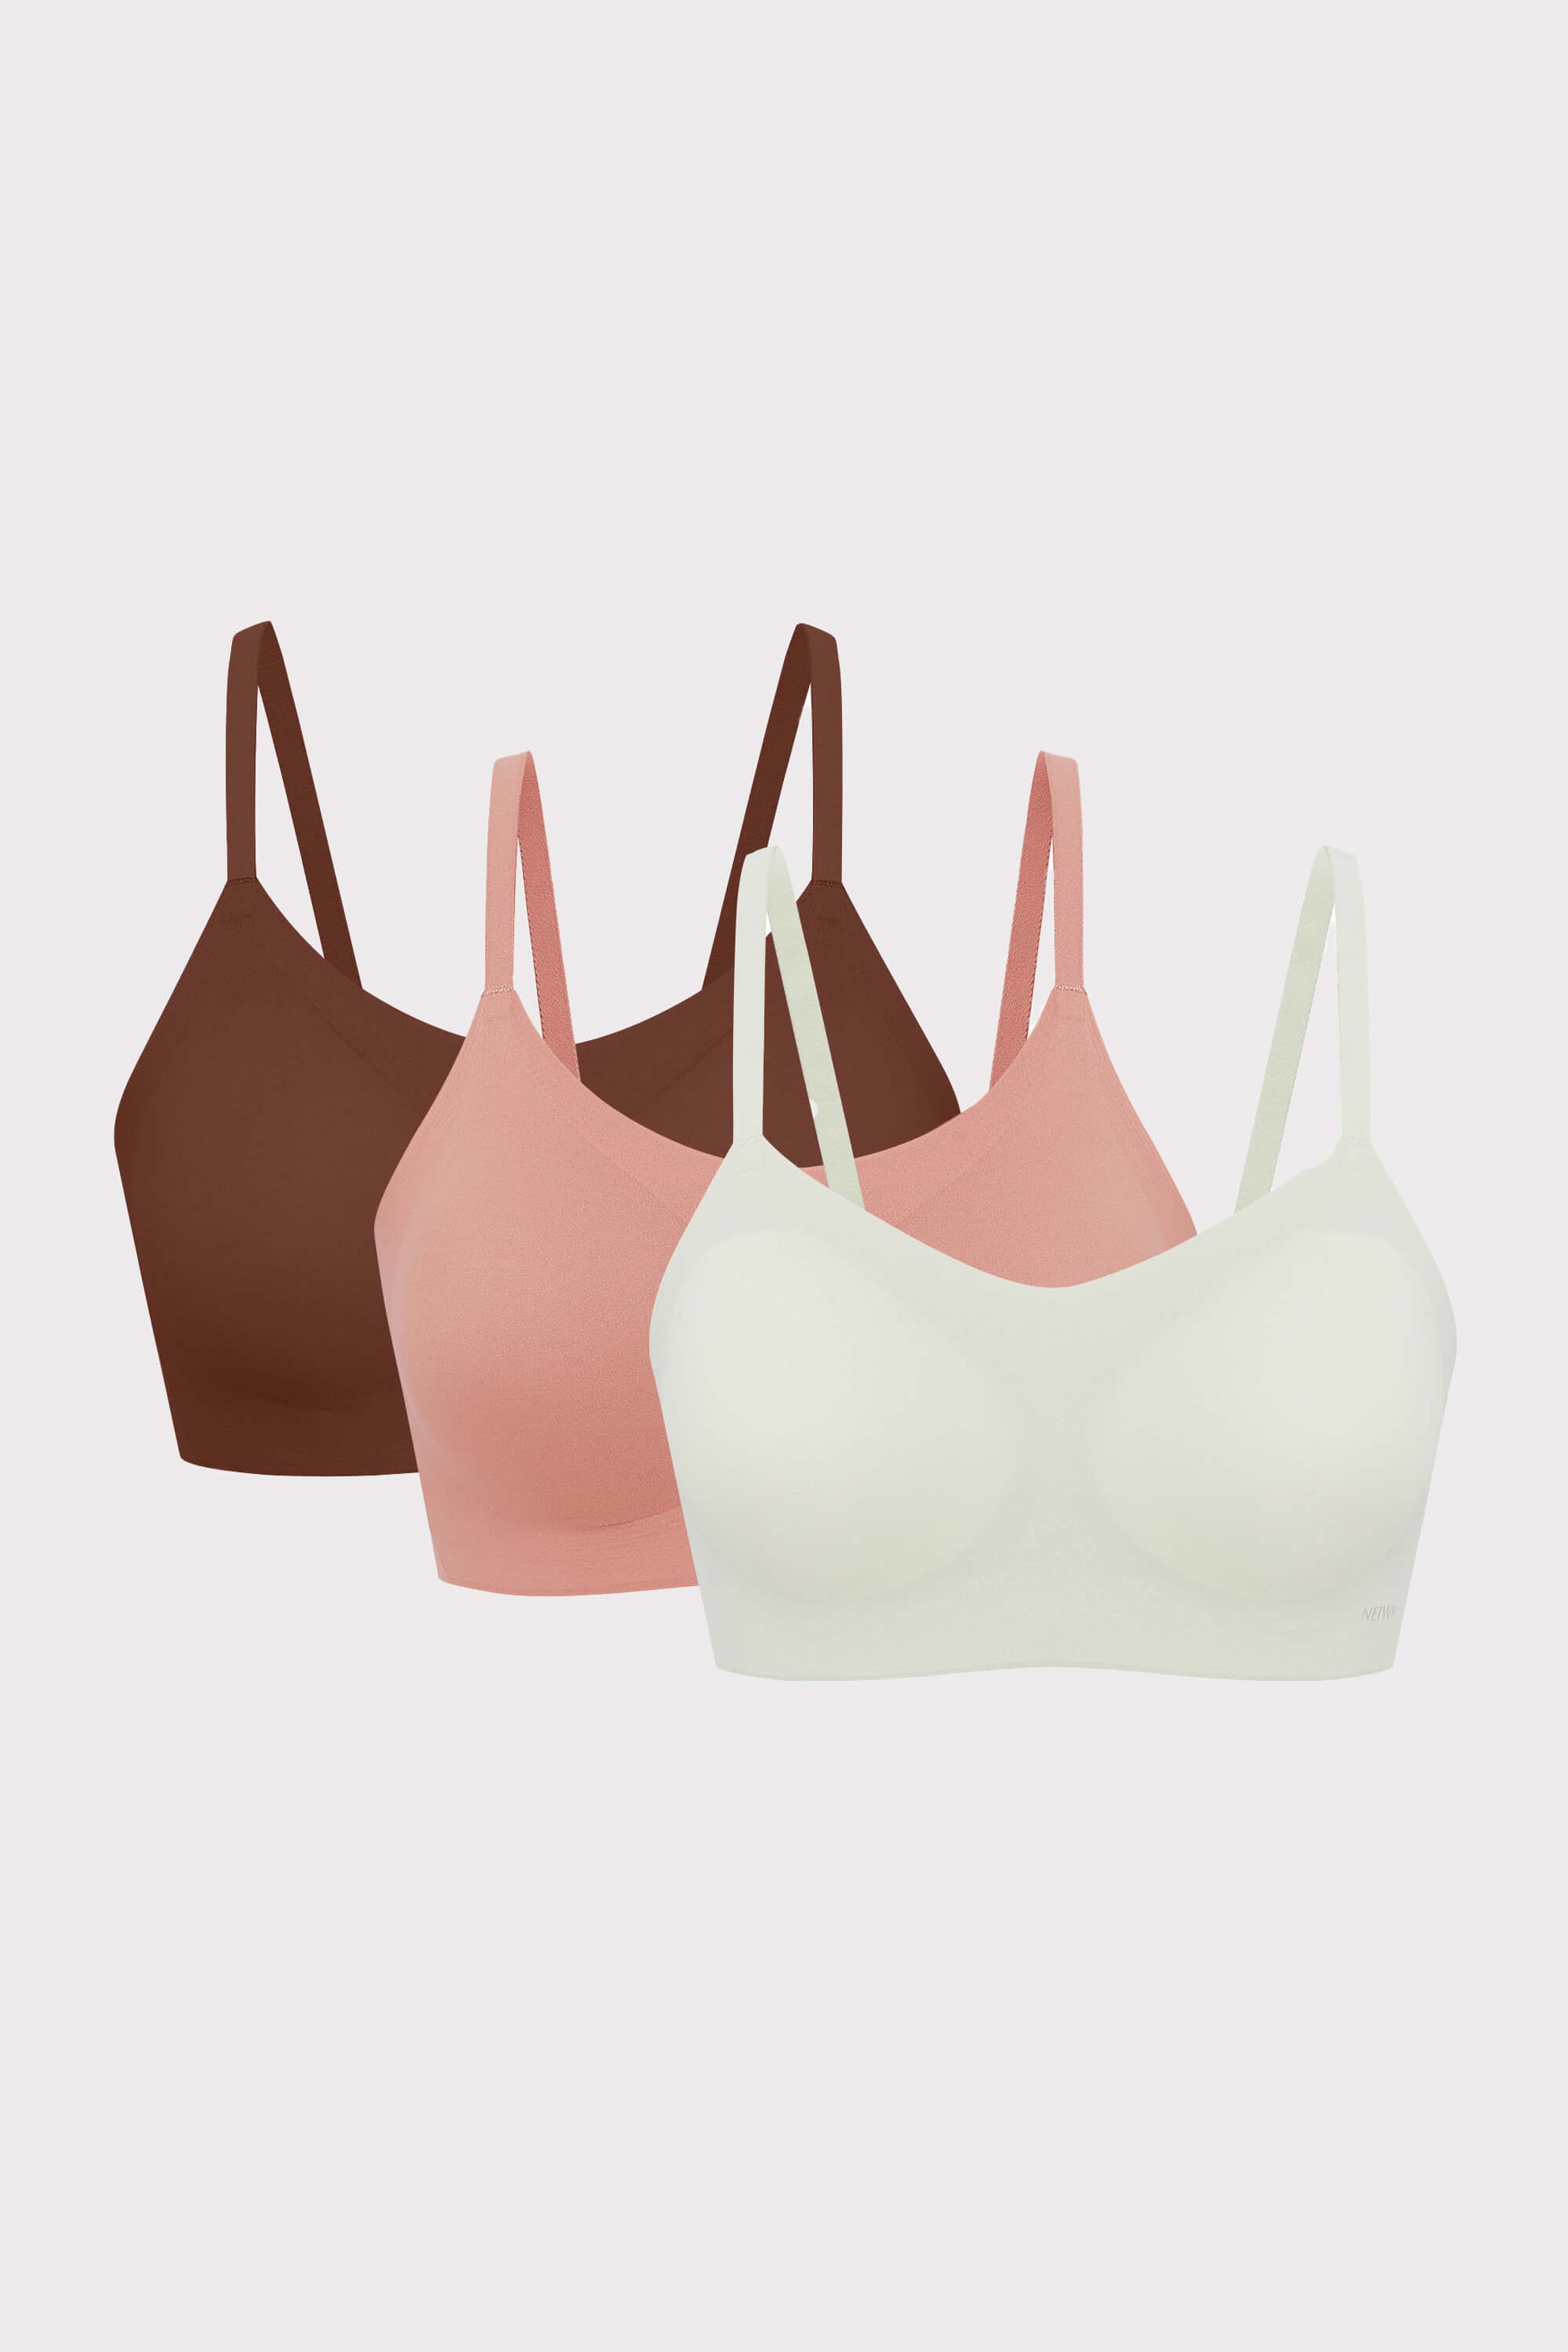 three bras in brown, pink and off white